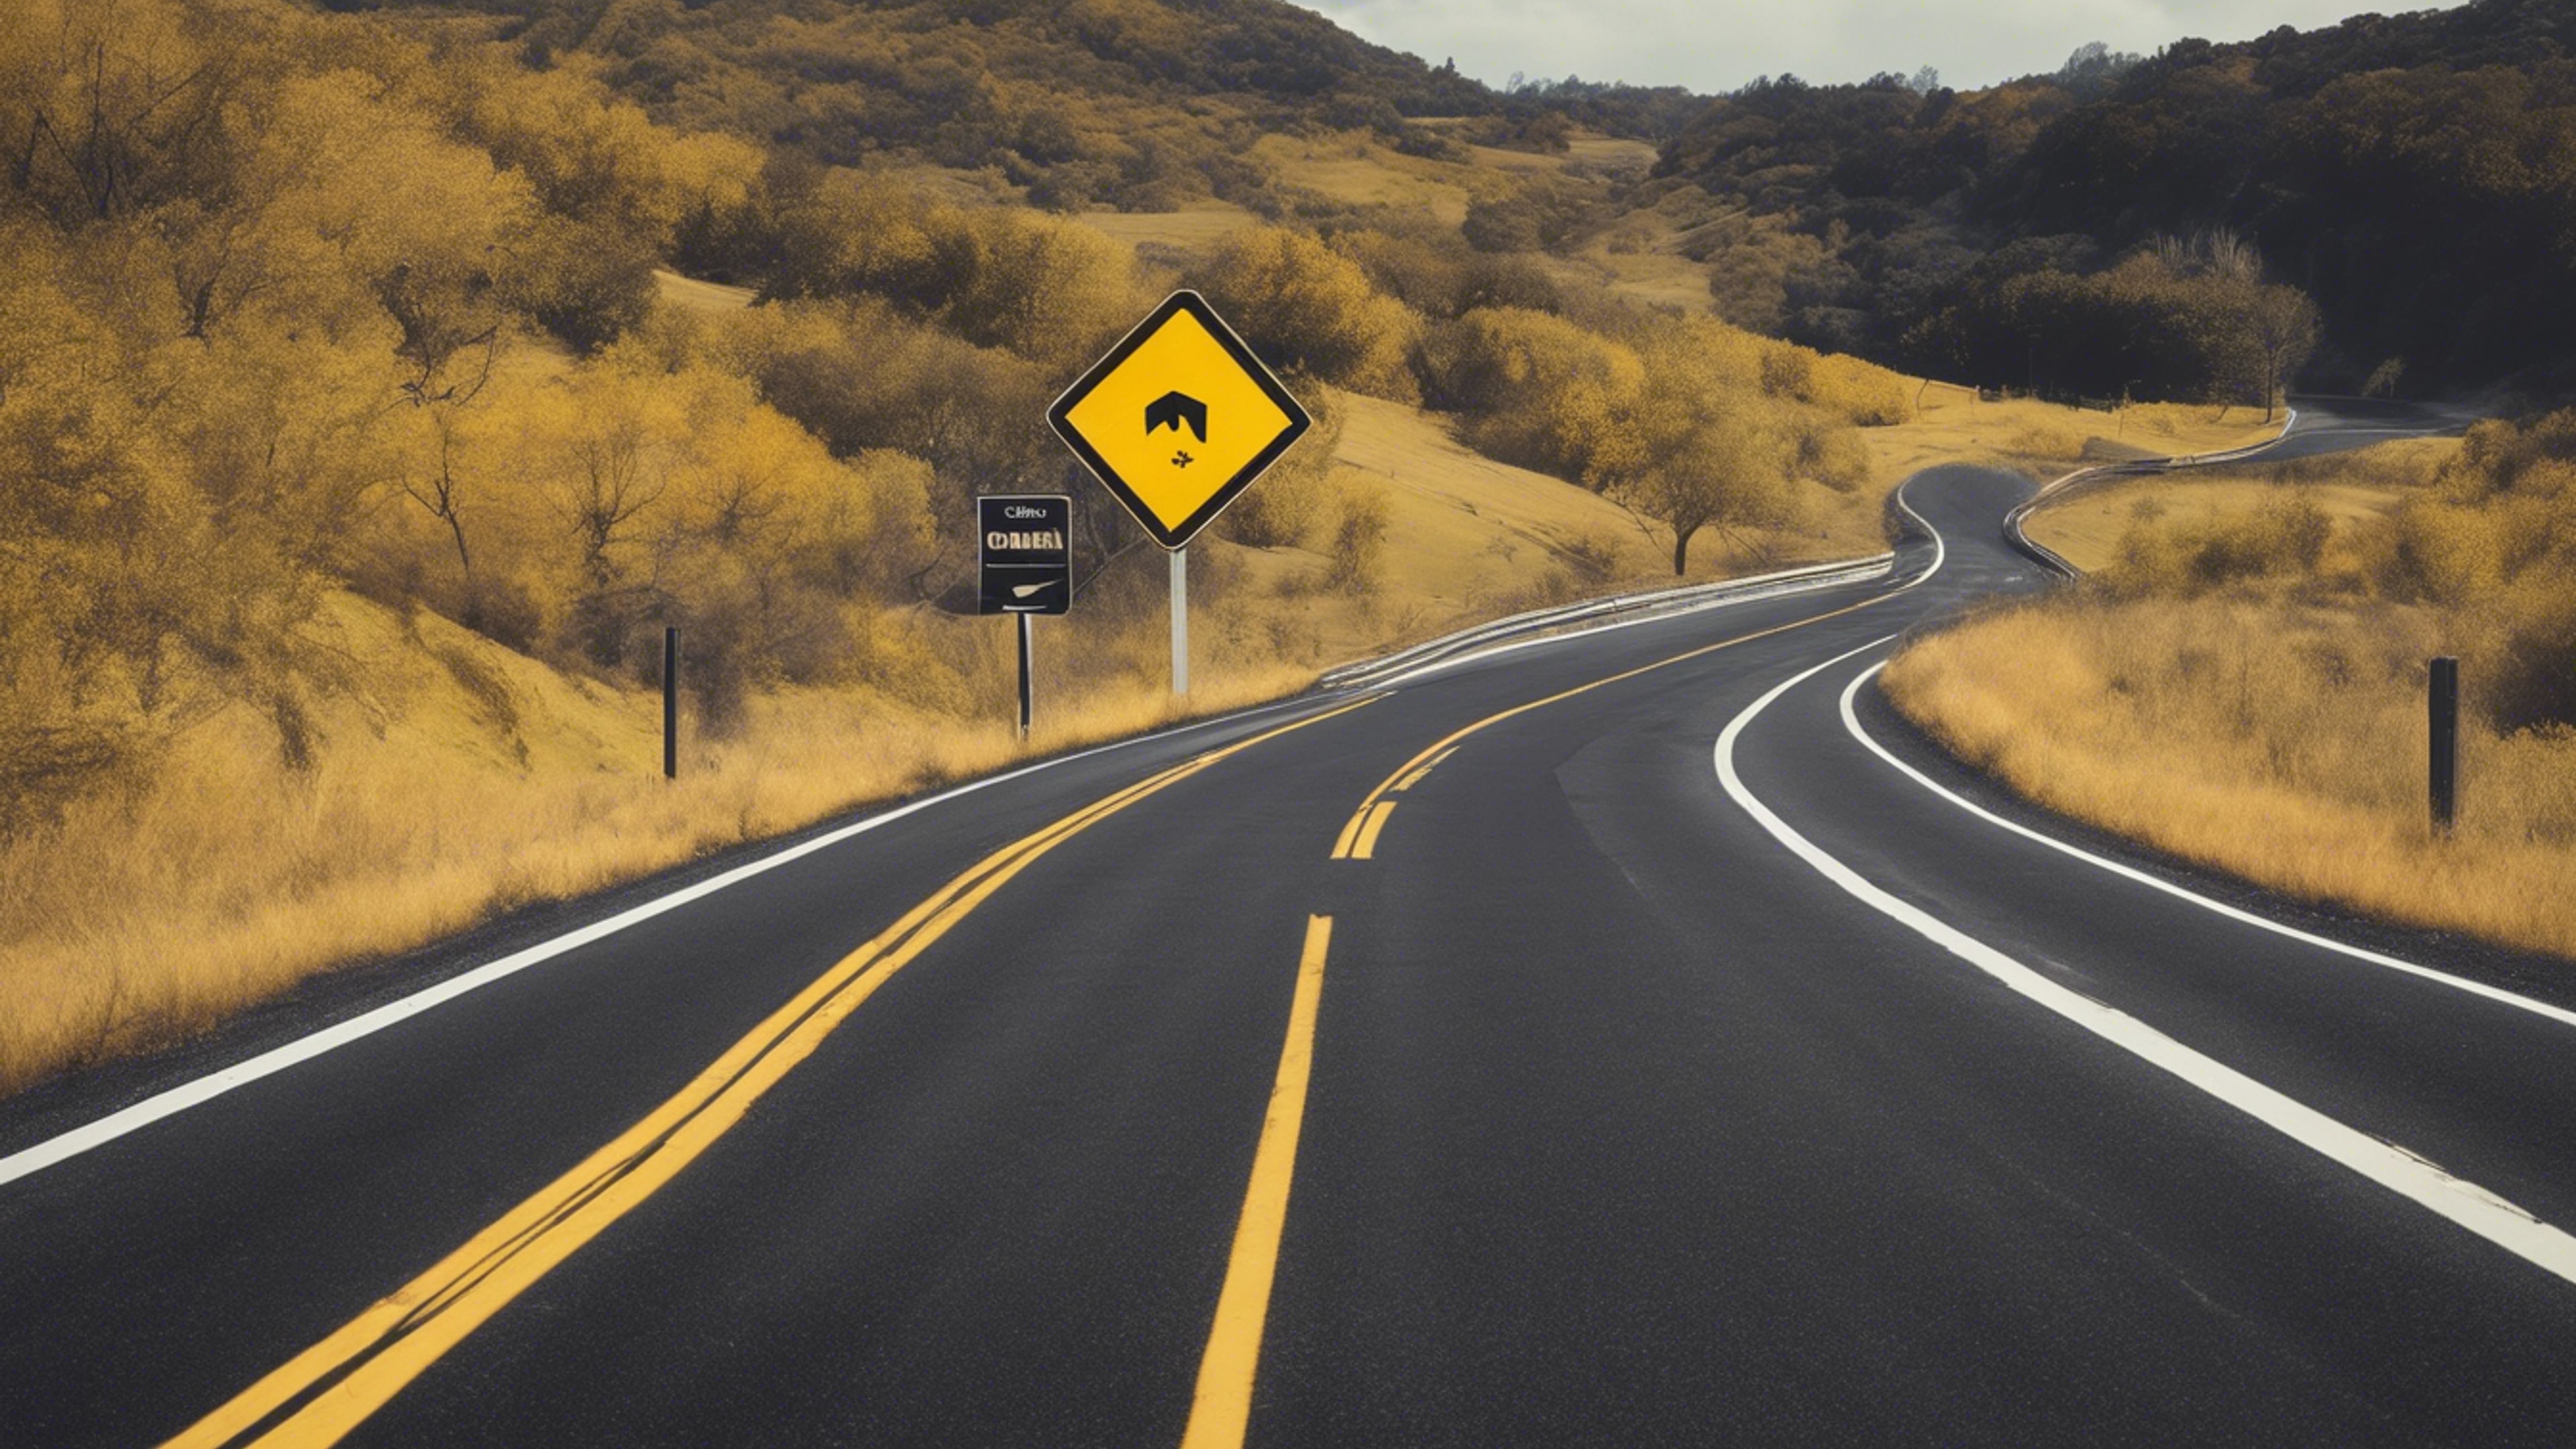 A black and yellow road sign cautioning drivers of a curve ahead on a hilly highway.壁紙[54deeaa16e2344638200]